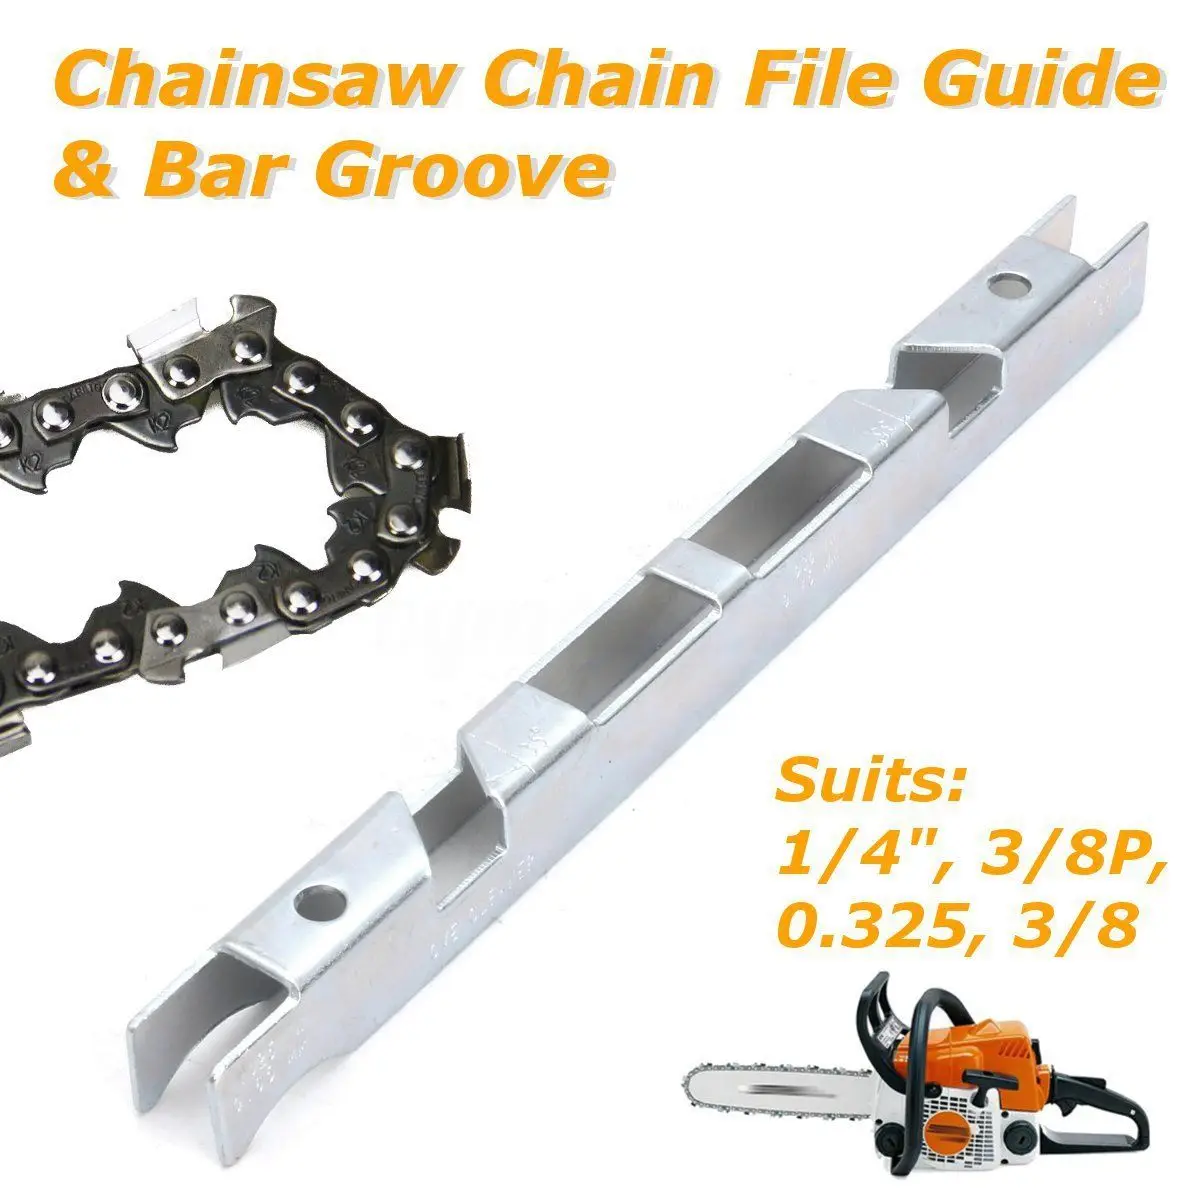 

Depth Gauge File Guide & Bar Groove Universal For 1/4" 3/8" P 0.325" Chain Saw Chainsaw Garden Too Parts